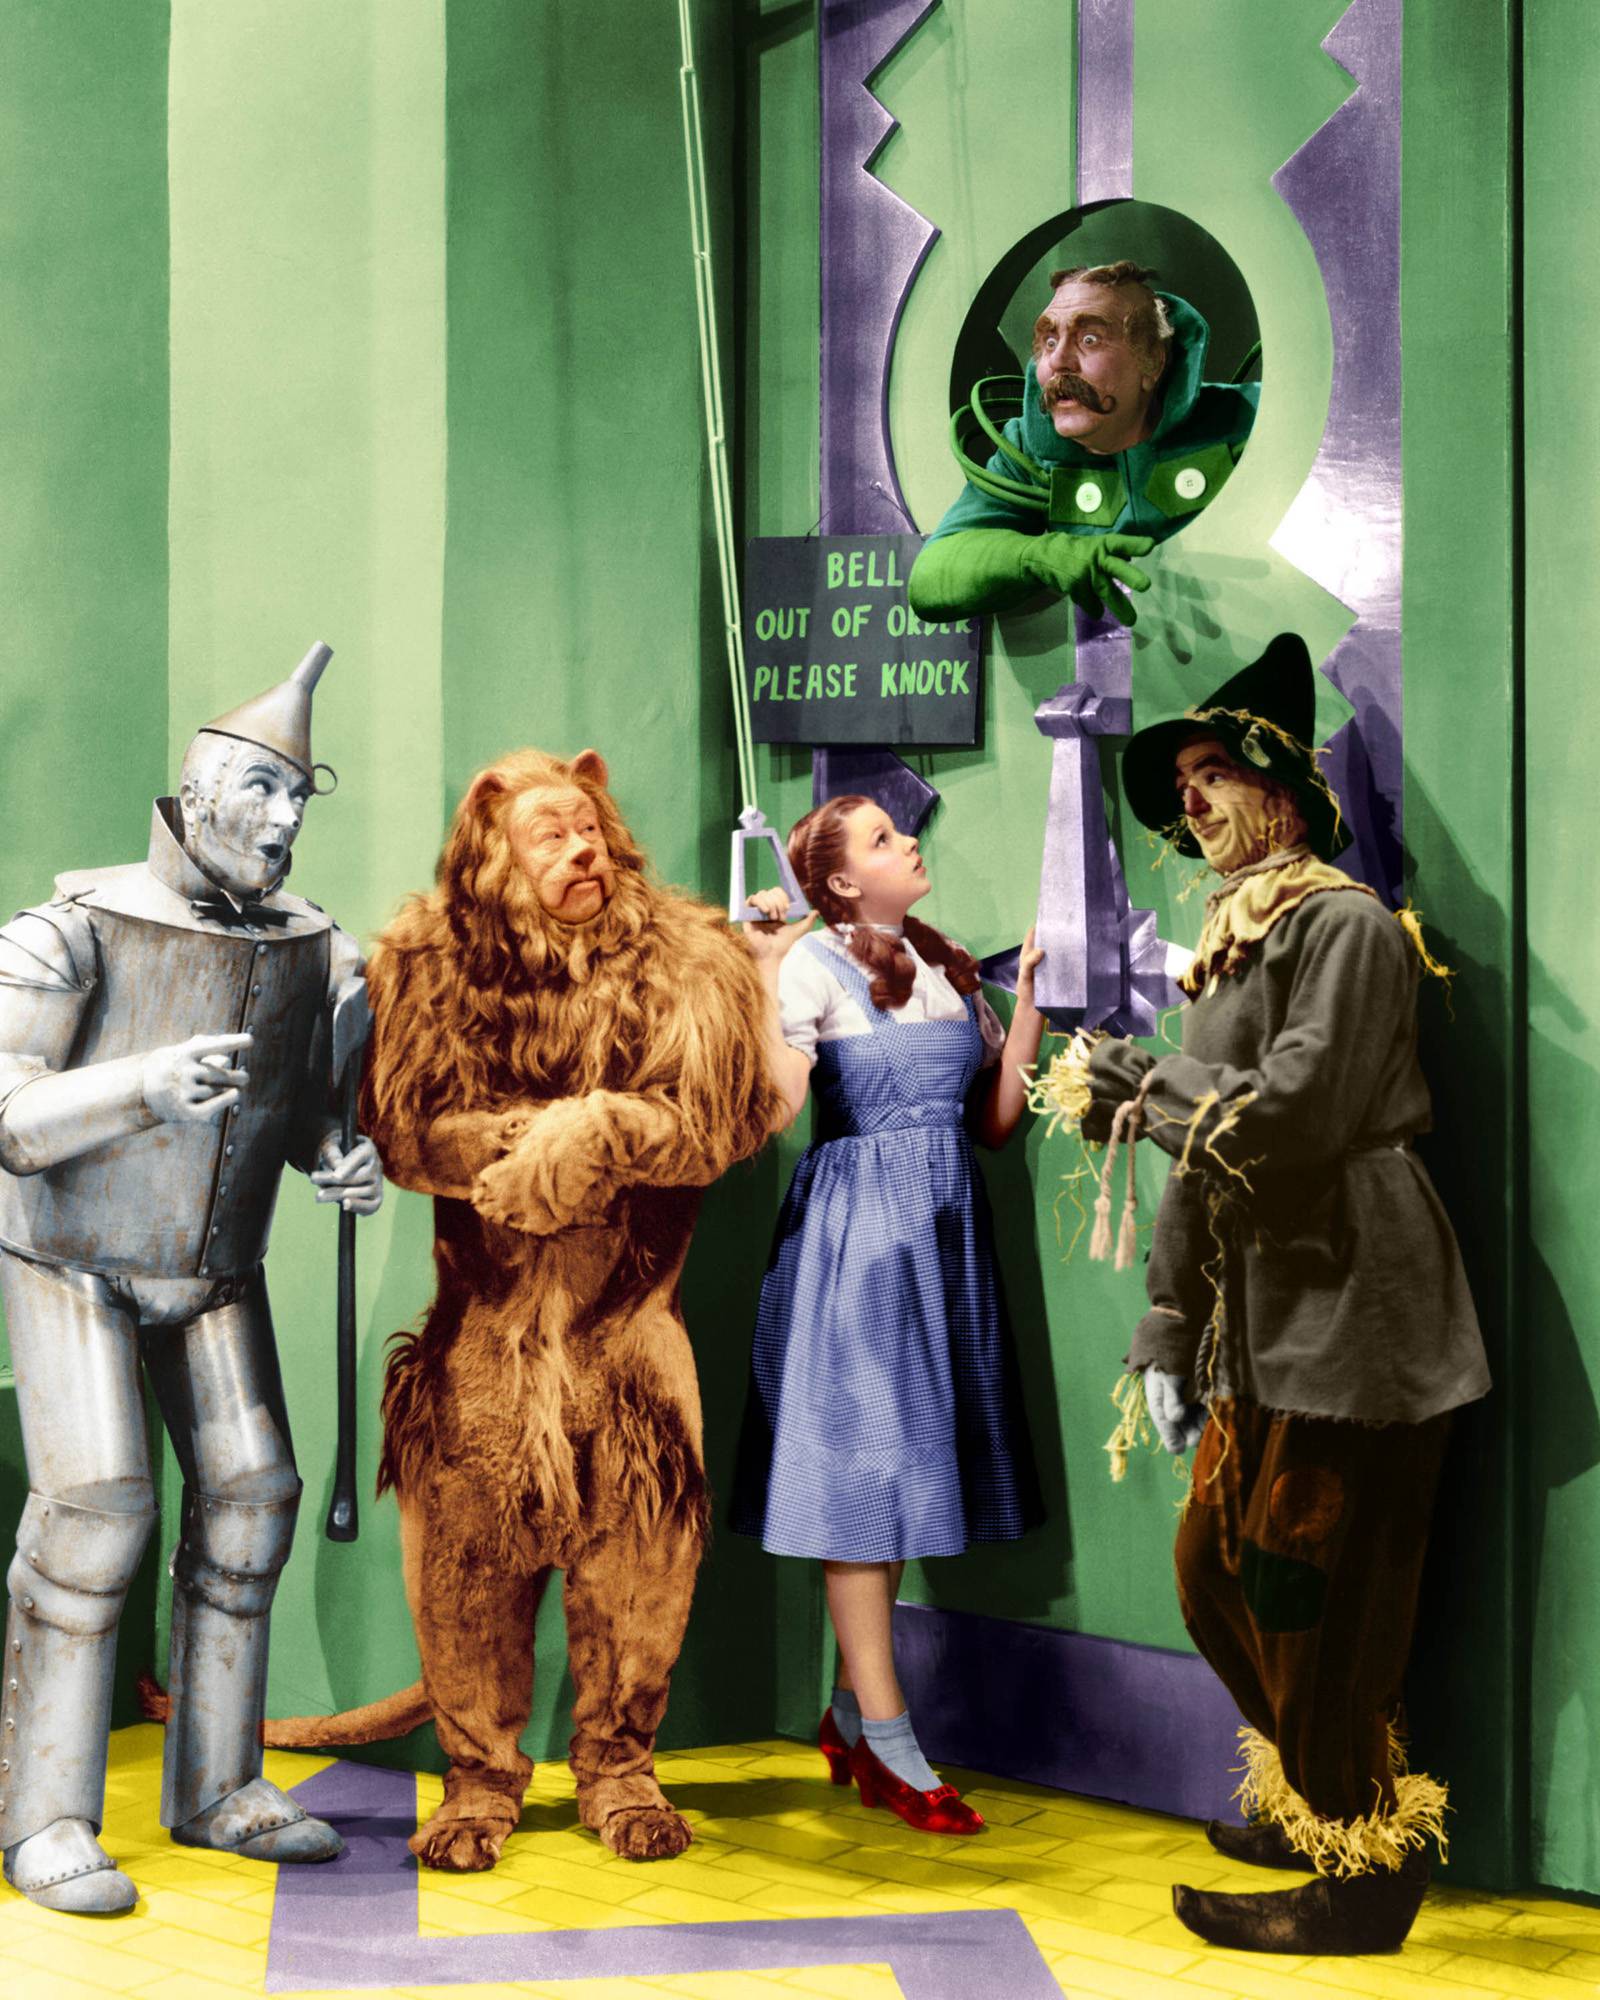 Of Oz Wallpaper for PC, Mobile for mobile and desktop